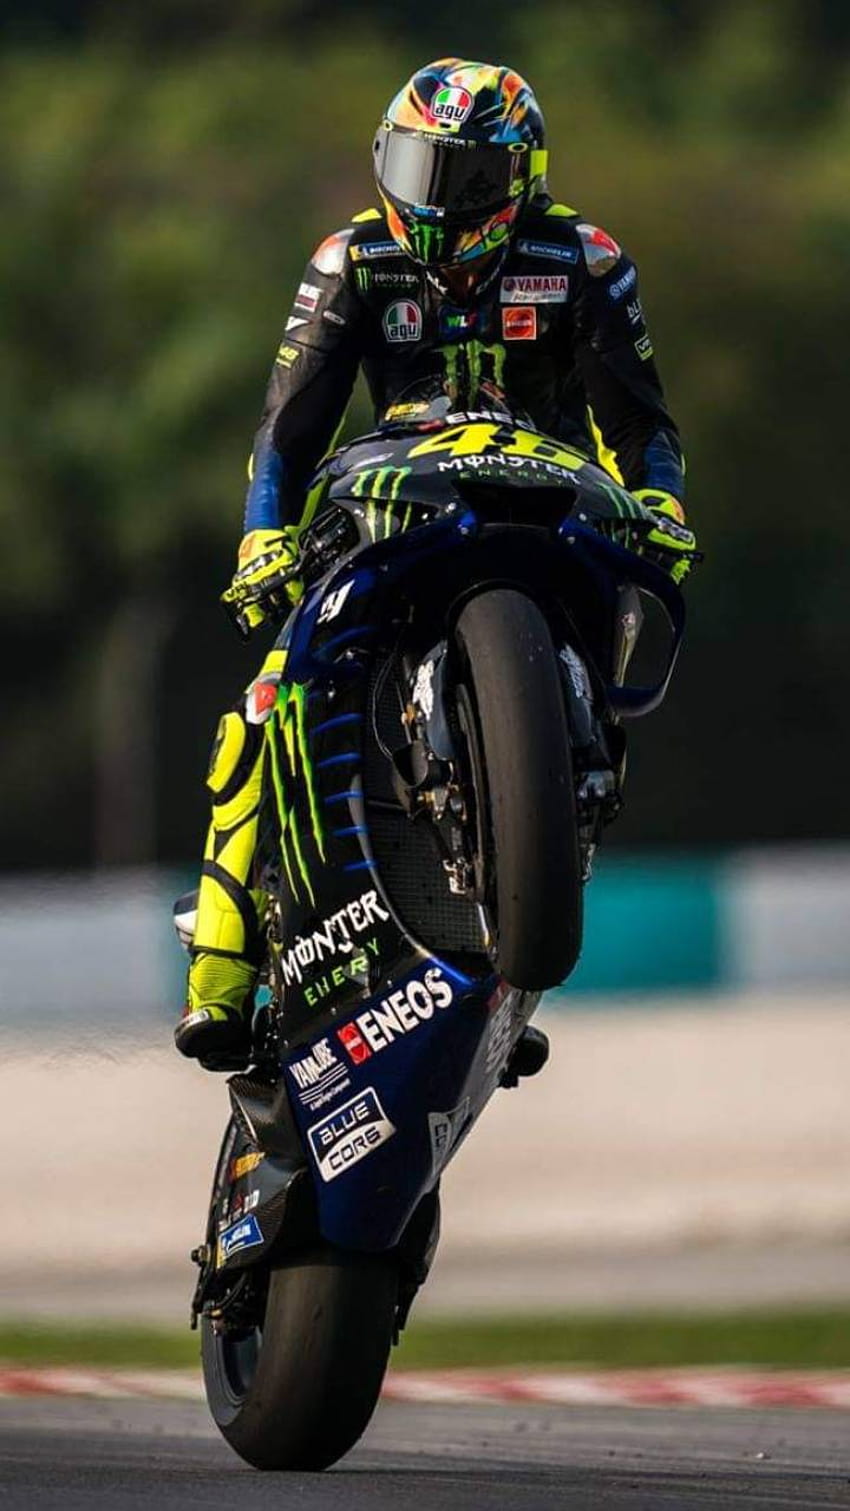 Valentino Rossi Greeting Card by Reka Michael